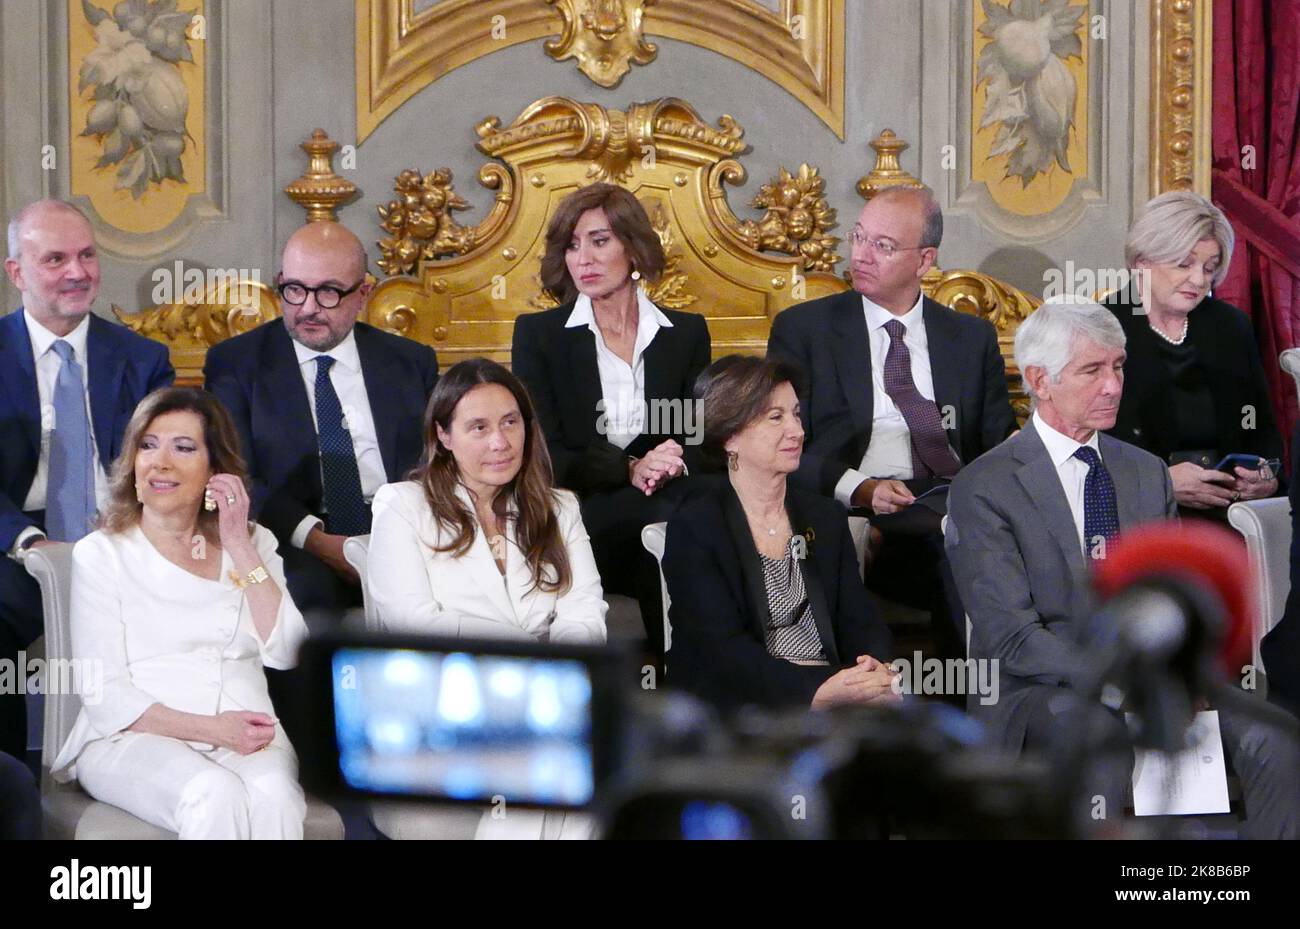 Rome, Italy. 22nd Oct, 2022. New Italian Ministers are going to swear the oath of Loyalty to the Italian Republic in Salone delle Feste at Palazzo del Quirinale, Rome, Italy, October 22 2022. From left to right, in the first row: Casellati Locatelli Roccella Abodi. (Photo by Elisa Gestri/SIPA USA) Credit: Sipa USA/Alamy Live News Stock Photo